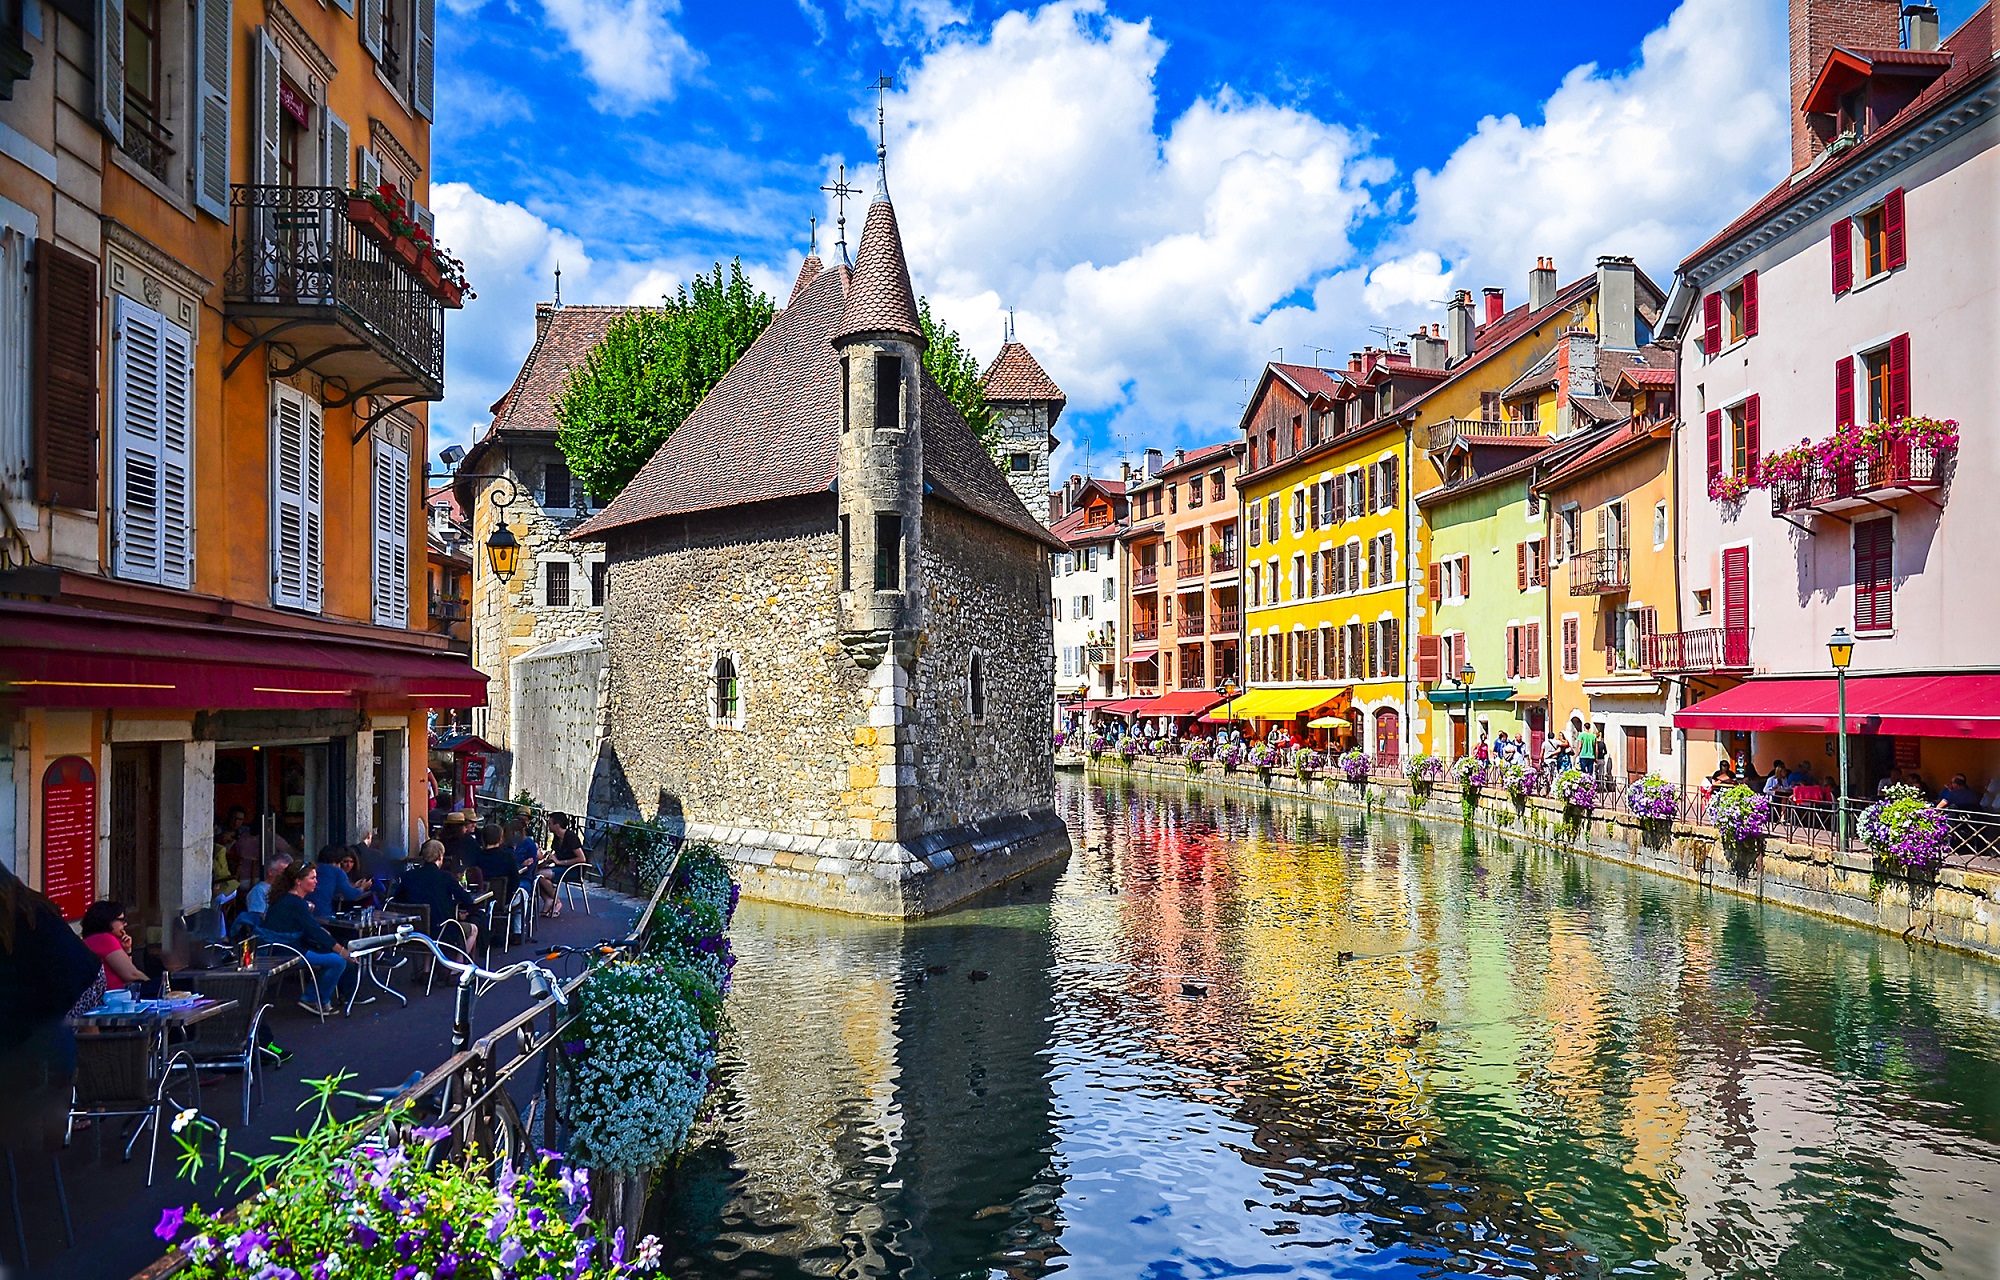 annecy - photo #4